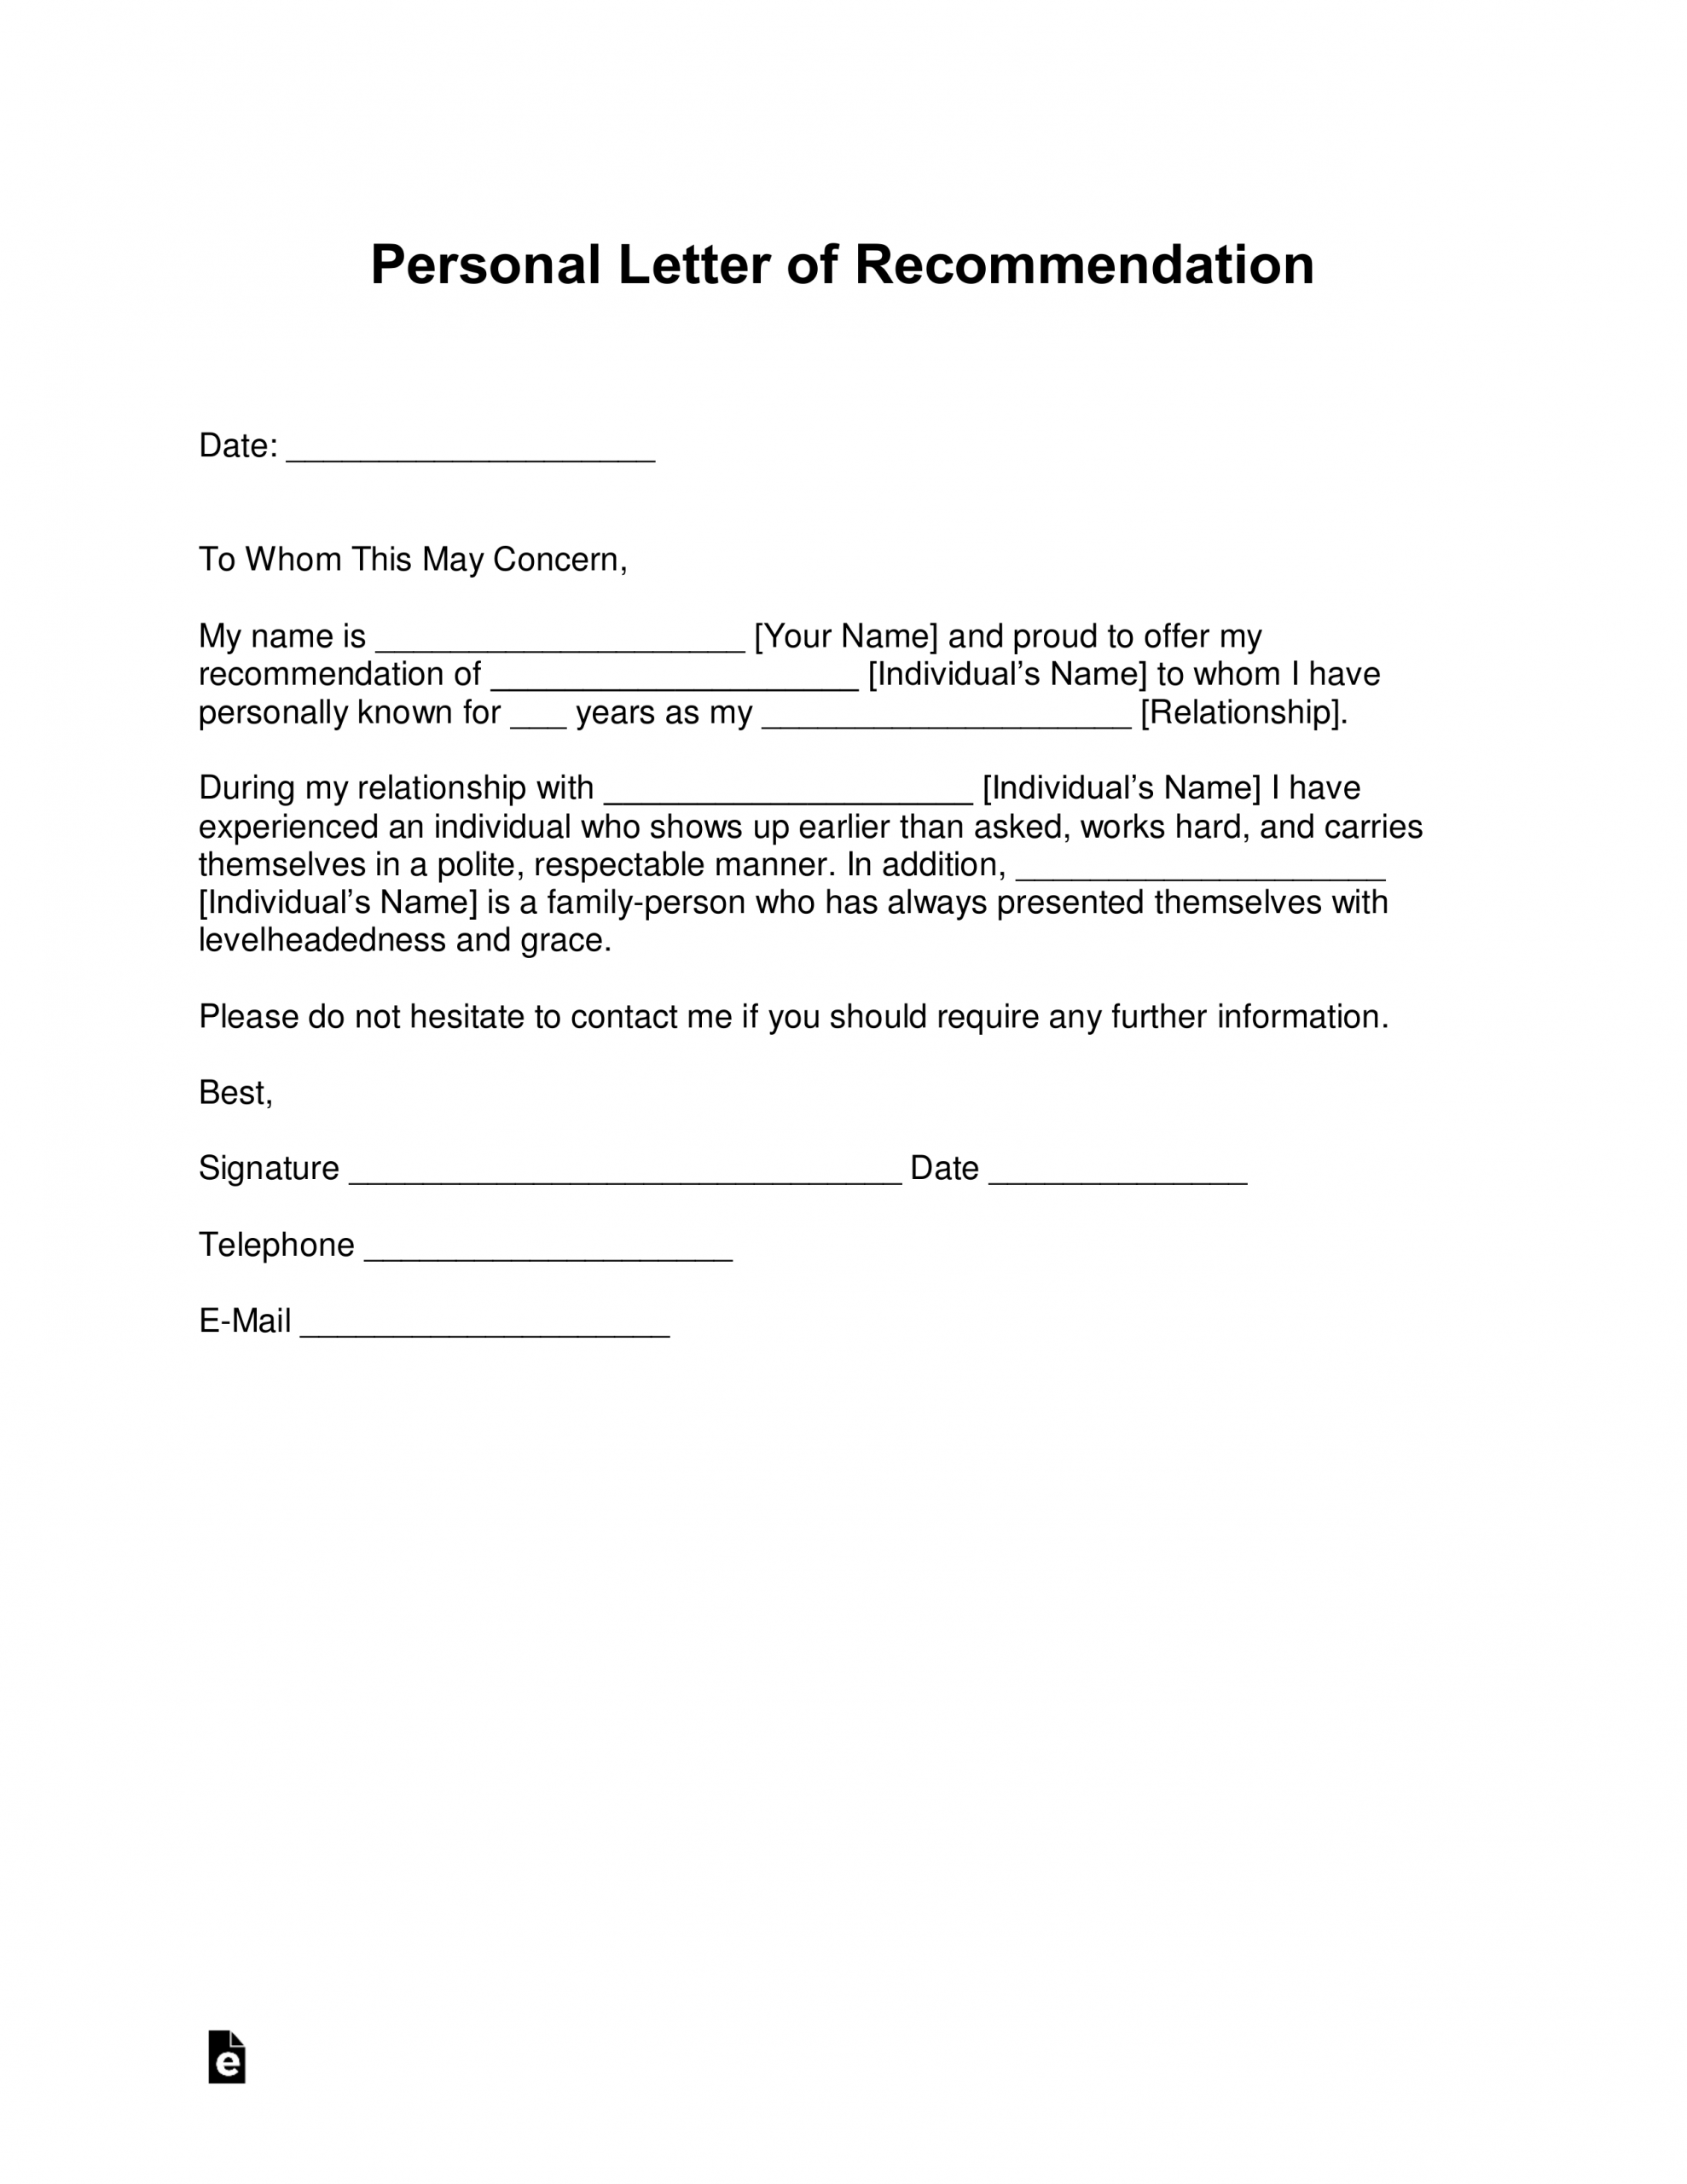 Free Personal Letter Of Recommendation Template For A in measurements 2550 X 3301